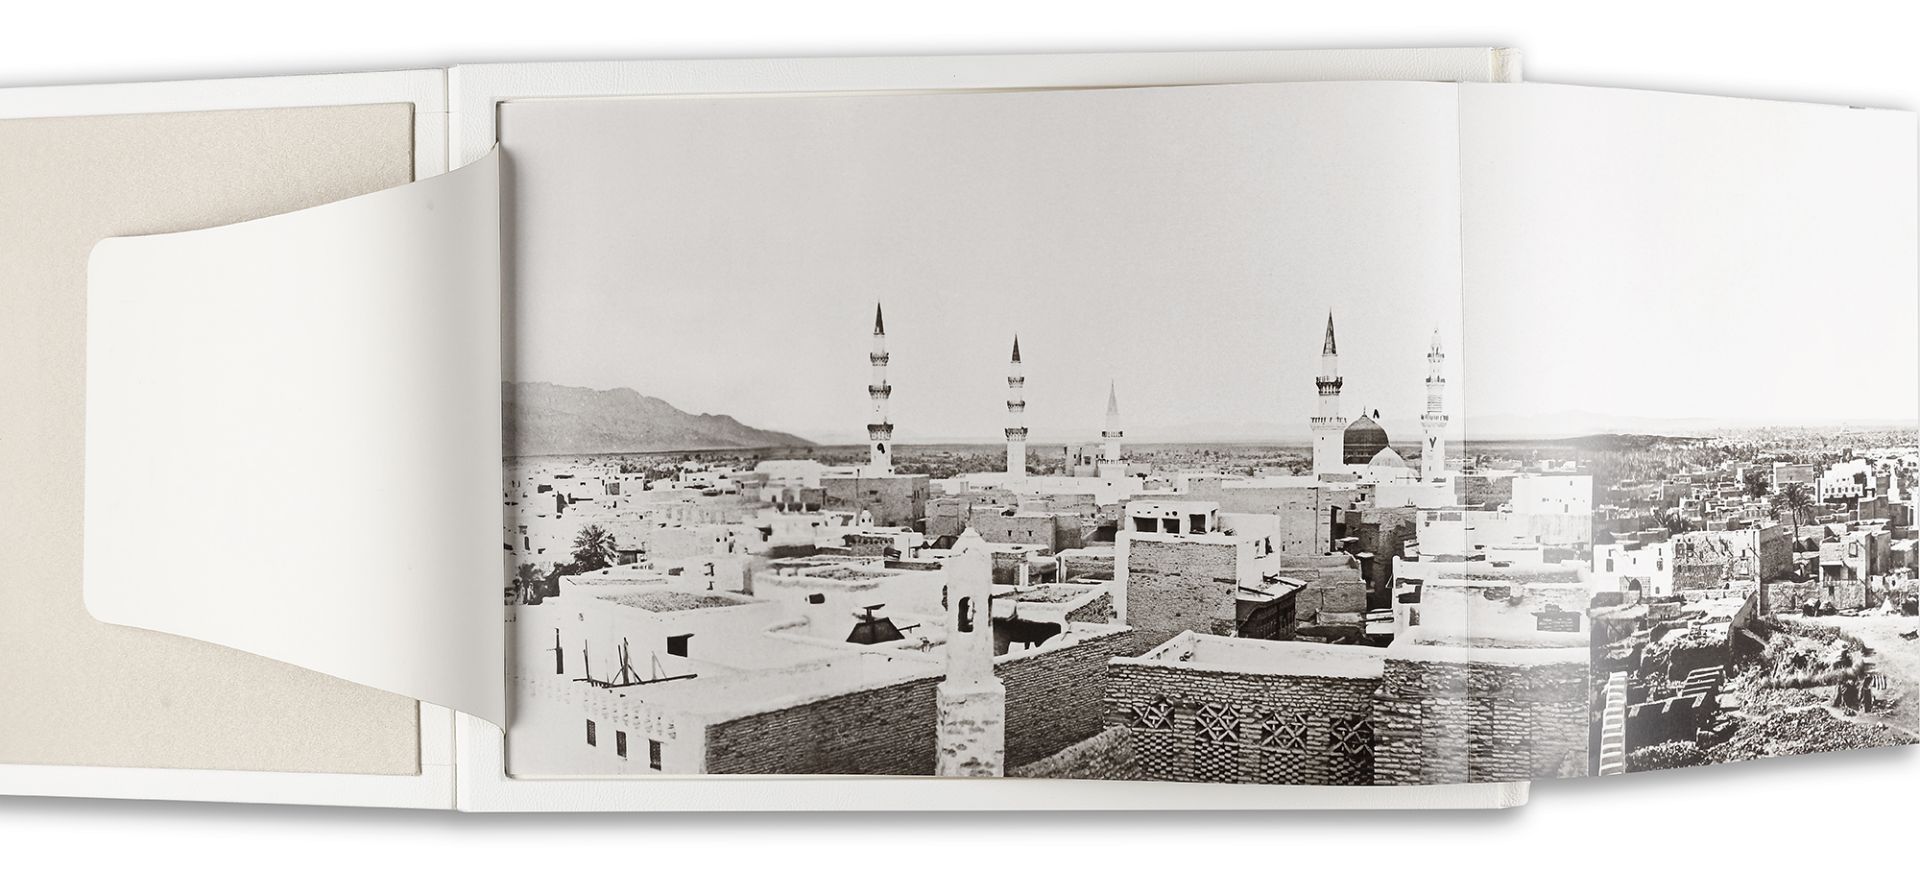 'HAREMEYN' IN PHOTOGRAPHS FROM THE OTTOMAN PERIOD SELECTED FROM THE ALBUMS OF SULTAN ABDULHAMID II - Image 5 of 20